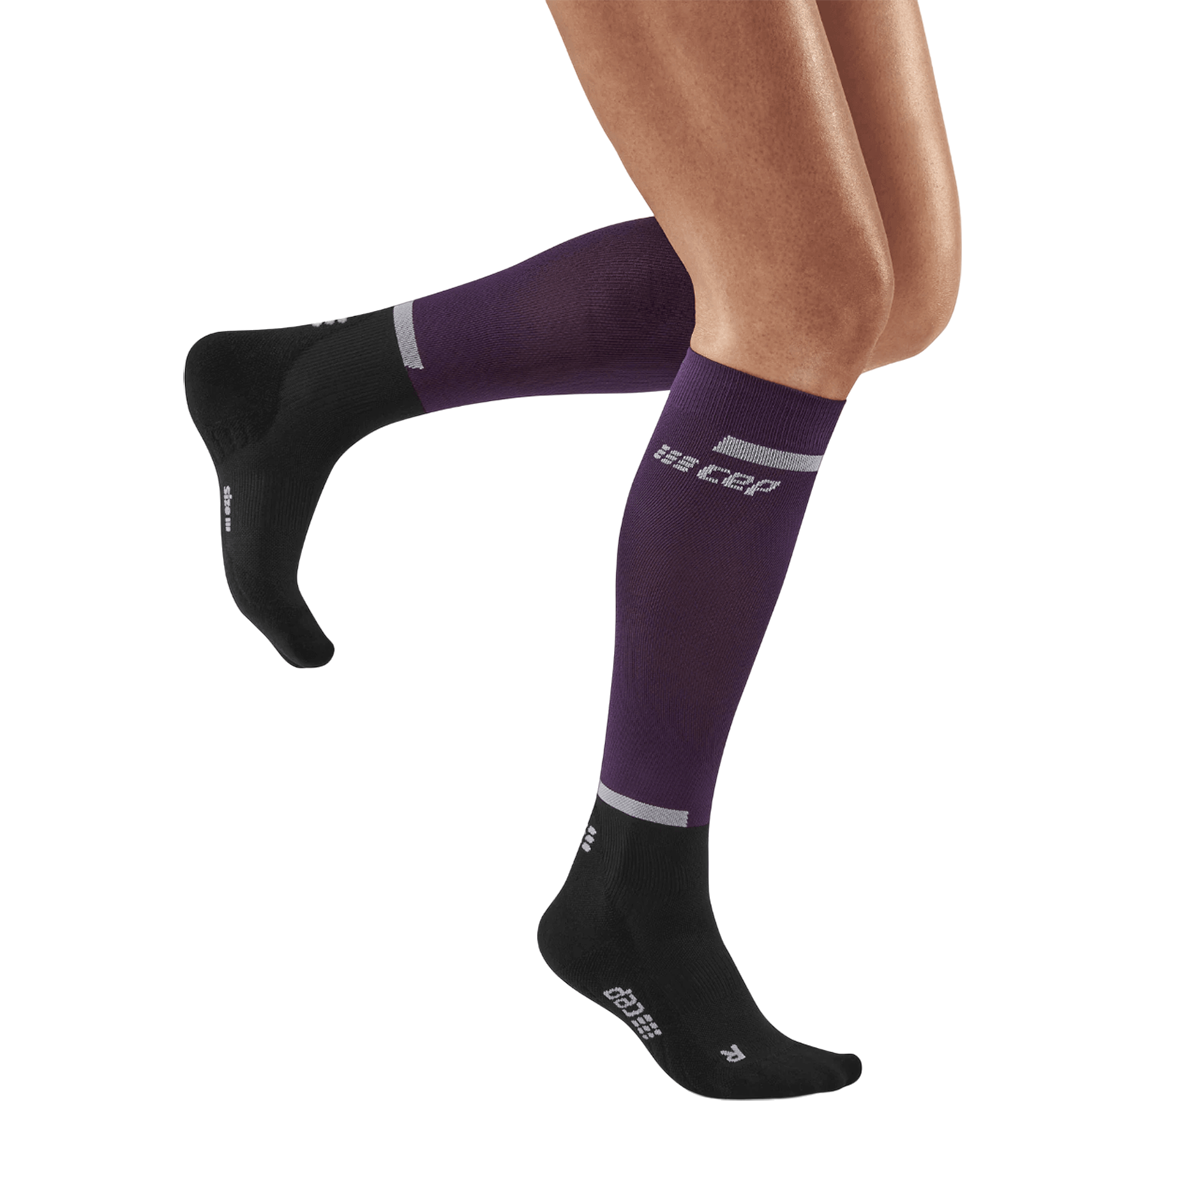 CEP The Run Tall 4.0 Sock, , large image number null